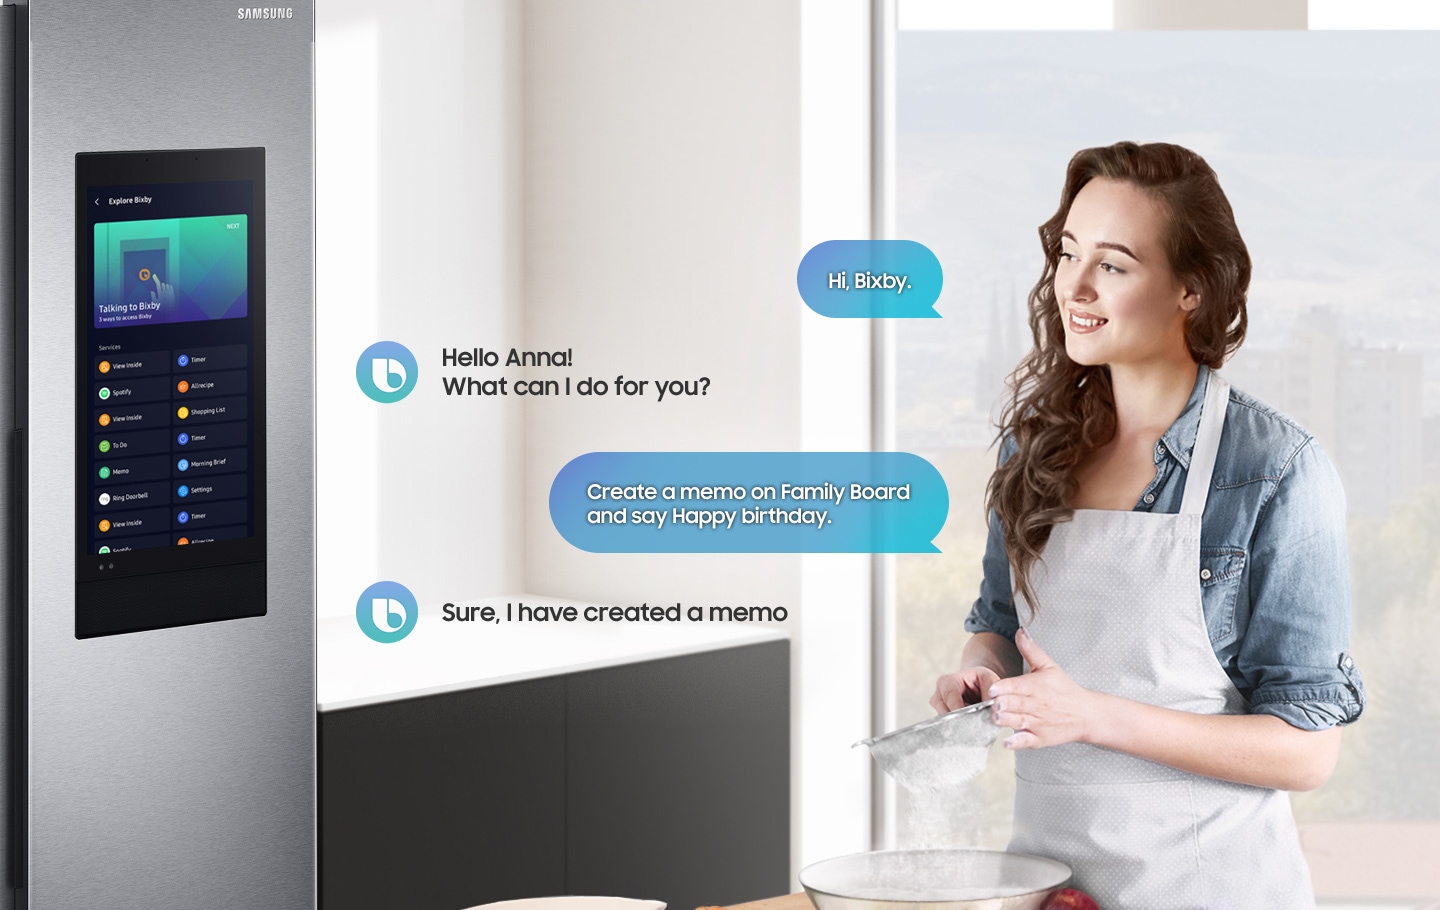 A woman takes notes on the Family Board with Bixby voice recognition while preparing meal.